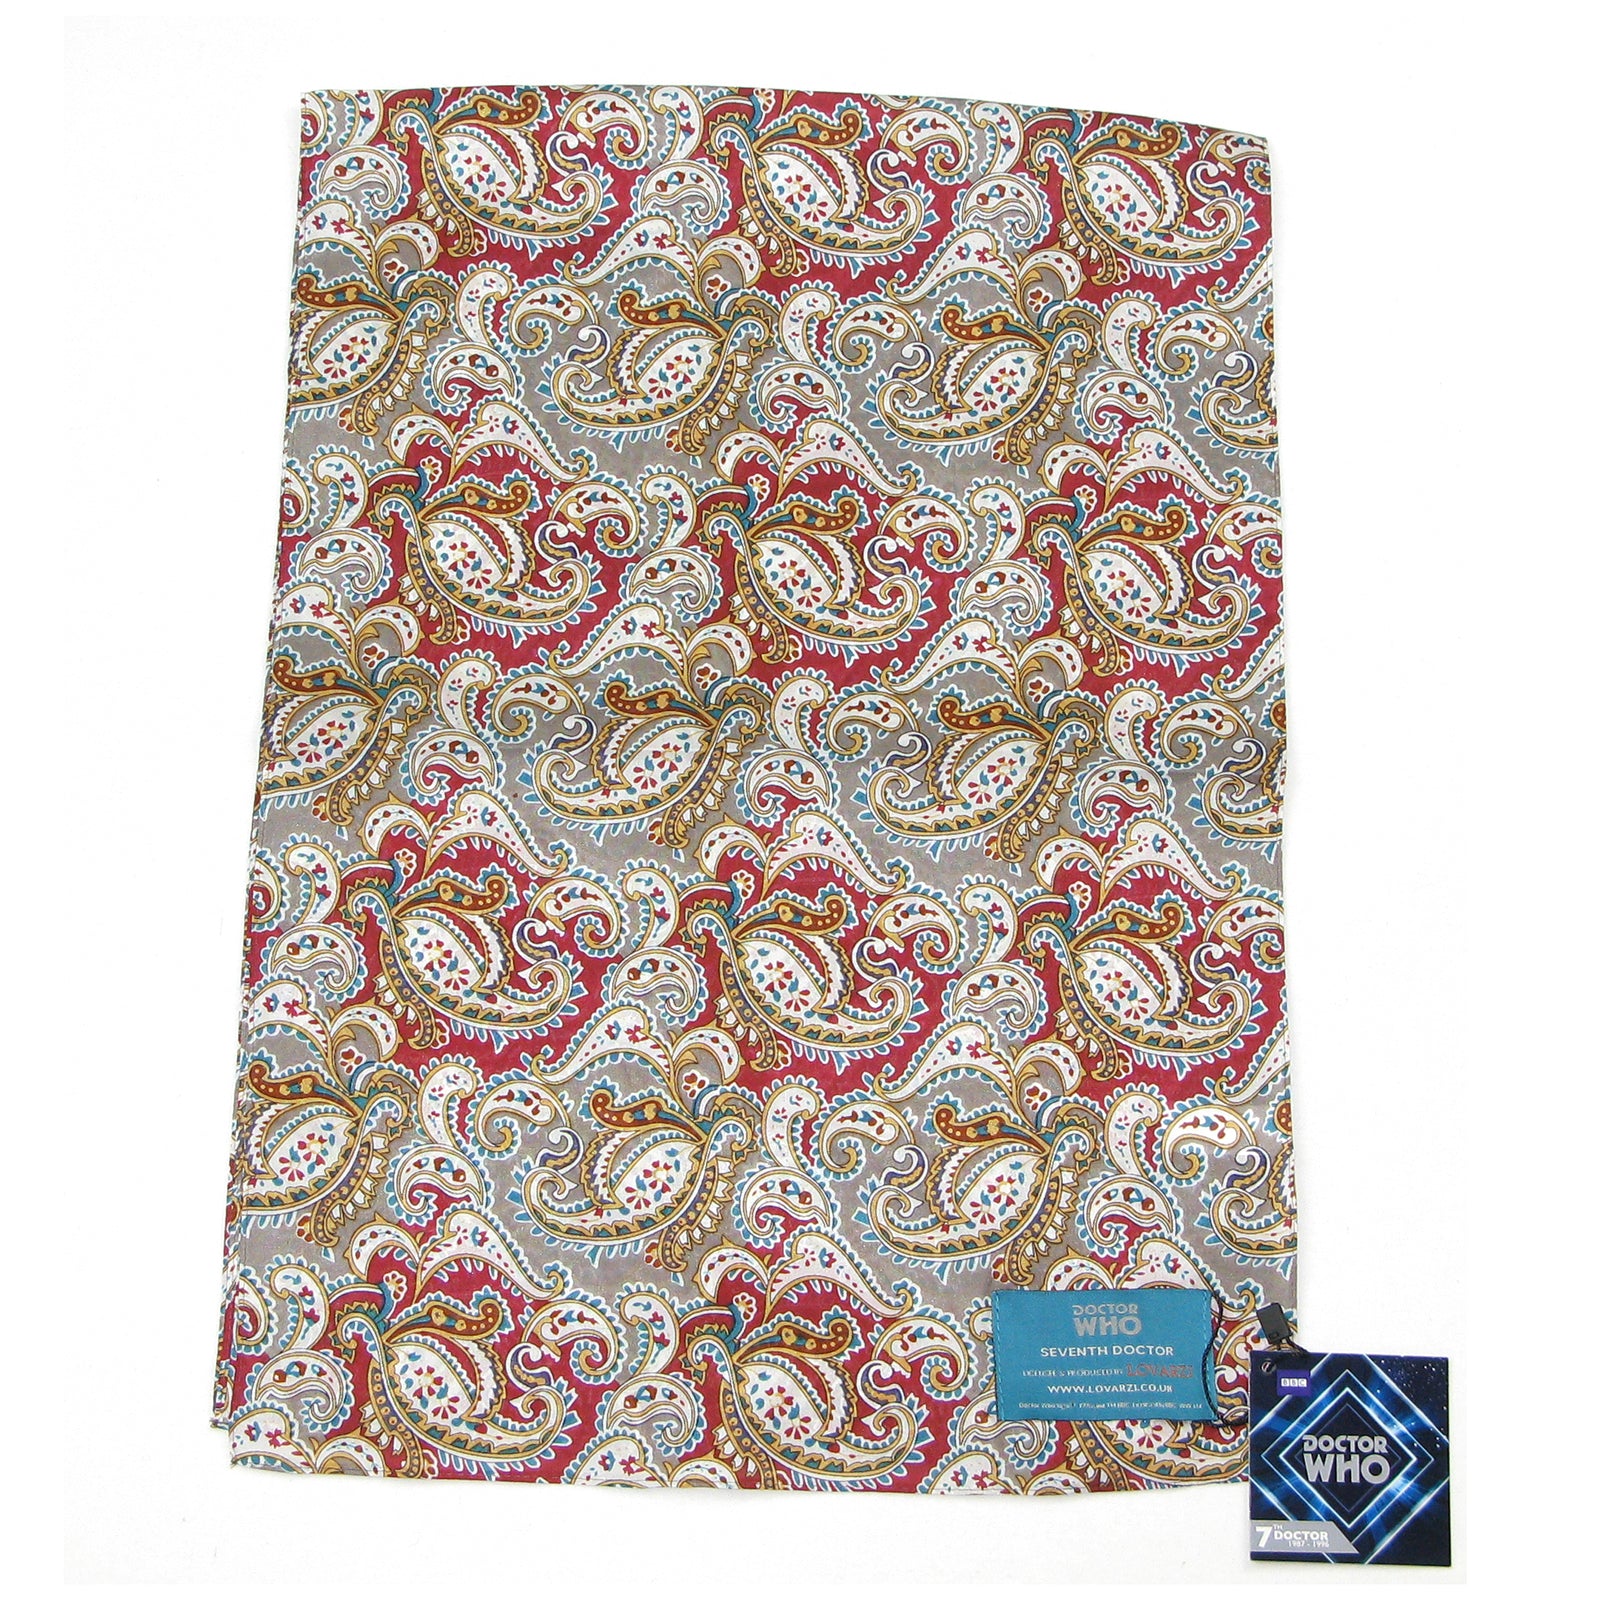 Seventh Doctor Silk Paisley Scarf - Official Doctor Who 7th Doctor ...